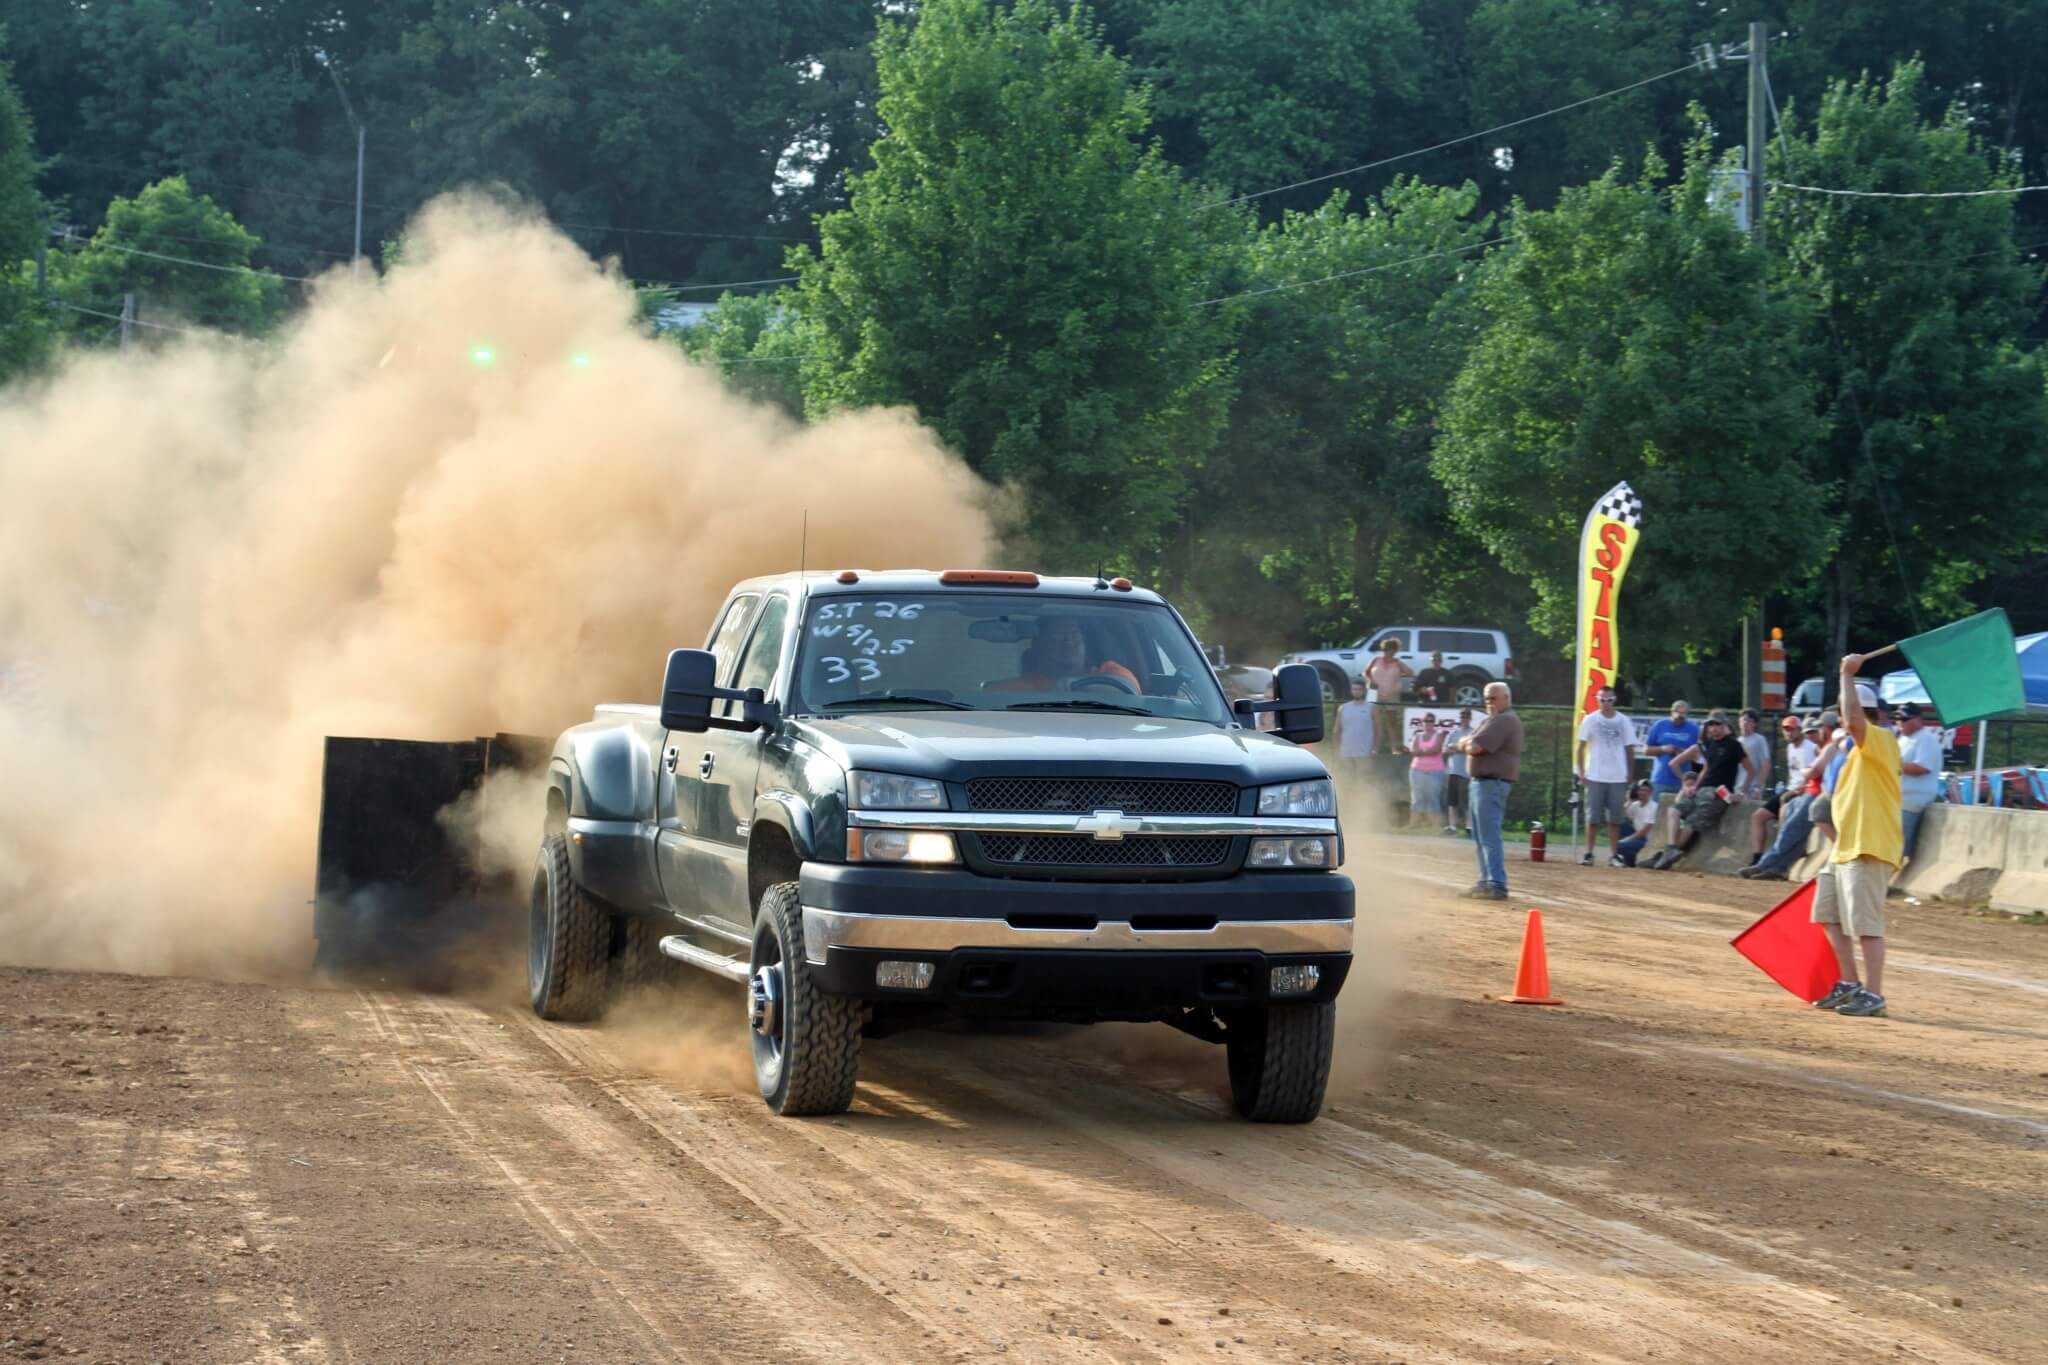 Jesse Harper pulled just short of 300 ft. with his Chevy to take the win in the Street class.